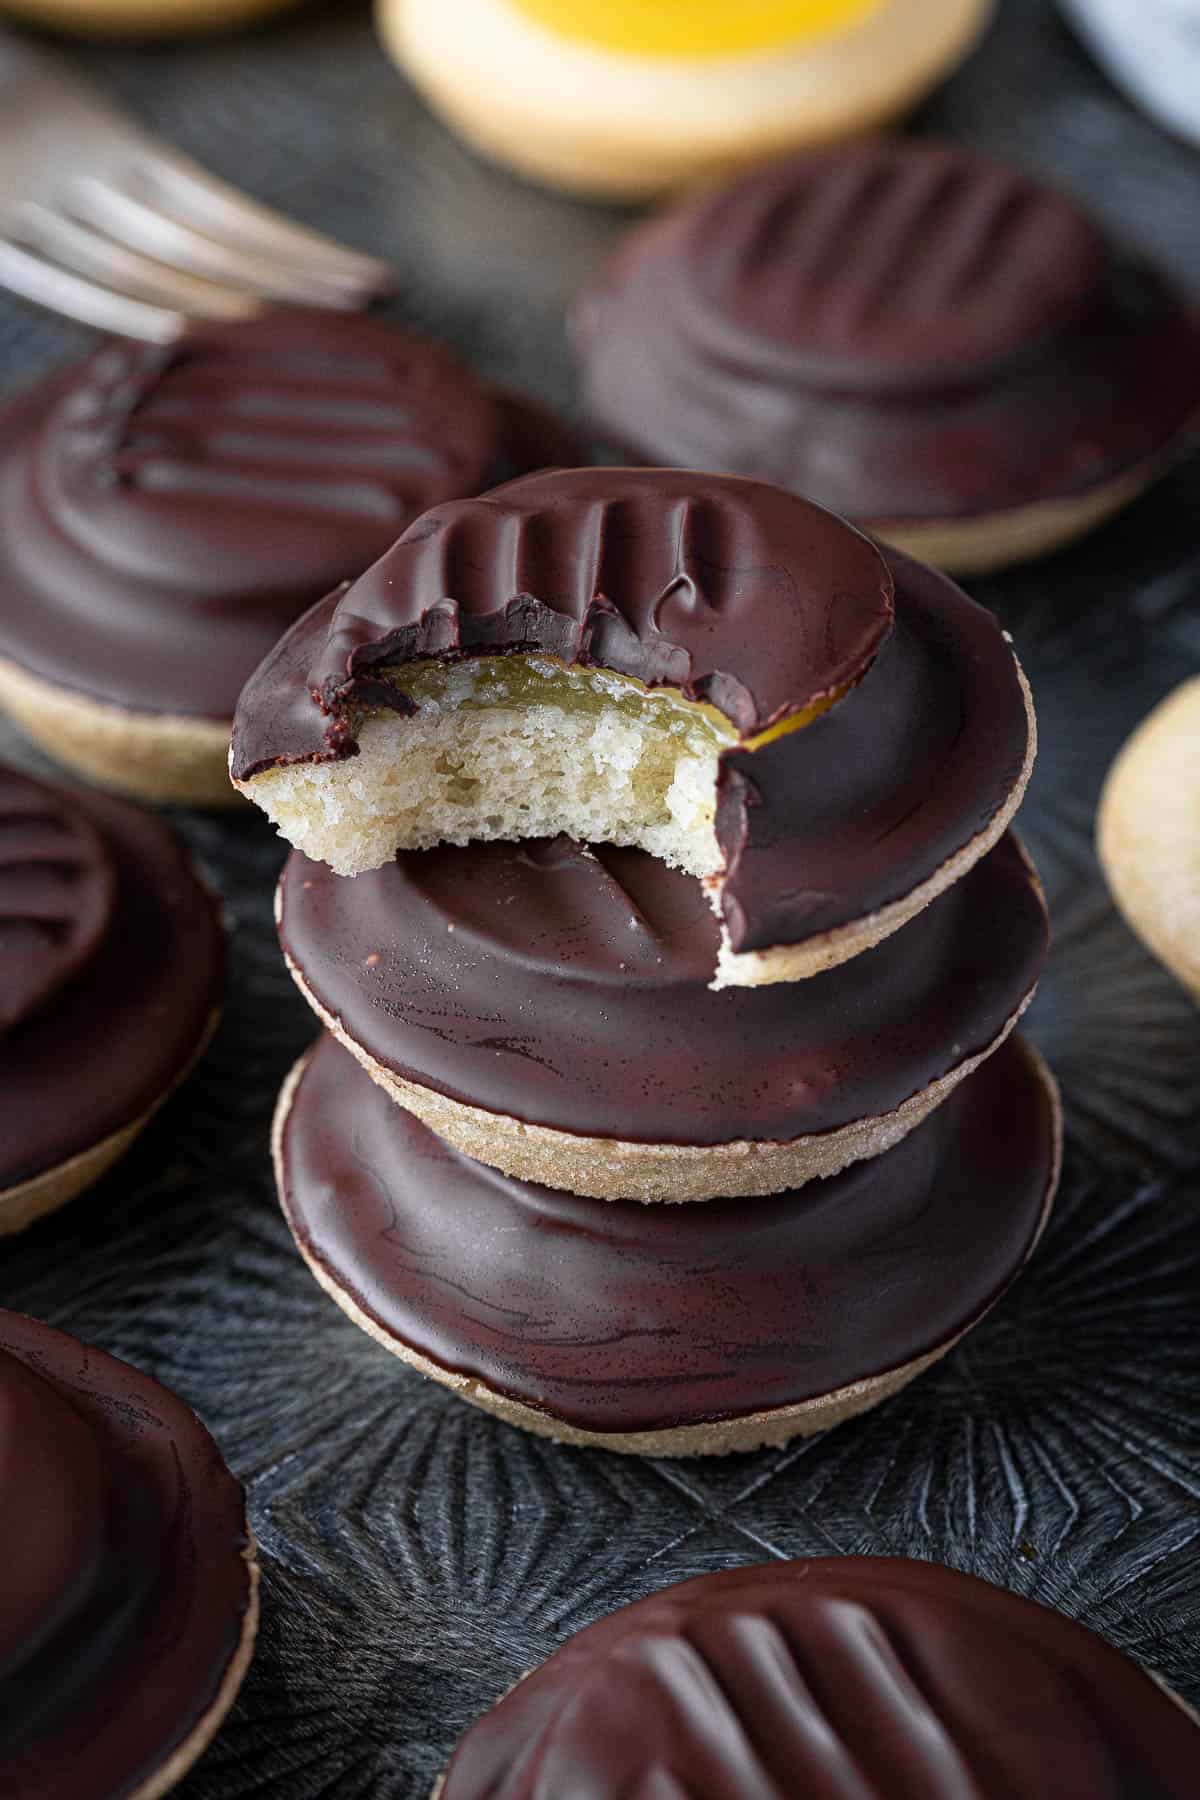 A stack of vegan jaffa cakes, one with a bite taken out of it.